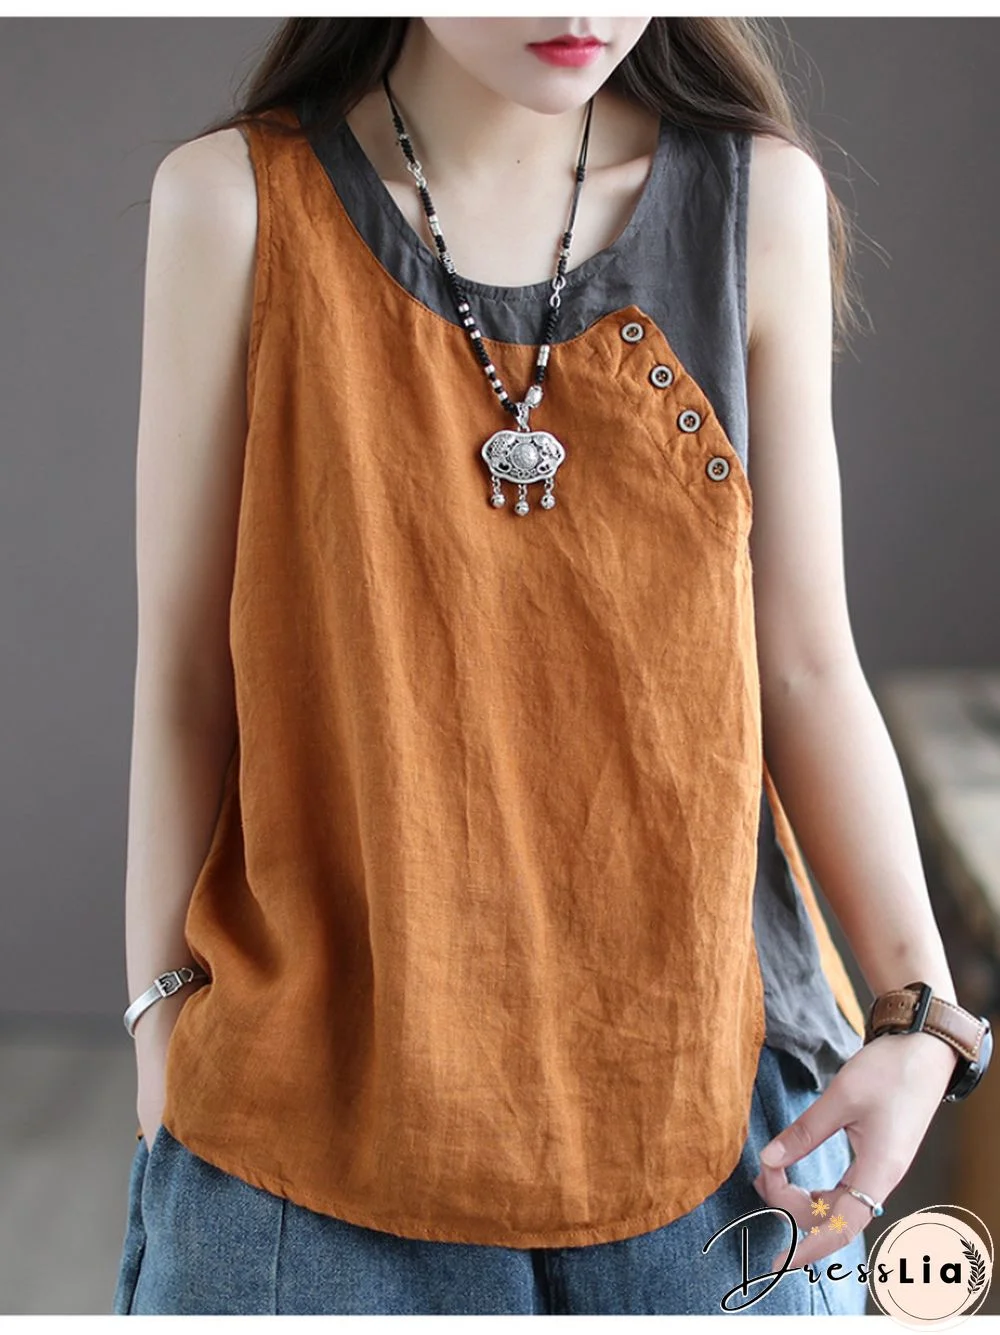 Women's Summer New Arts Style Women Clothing Sleeveless Tank Tops Cotton Linen Casual Top Femme Vintage Tank Top Large Size